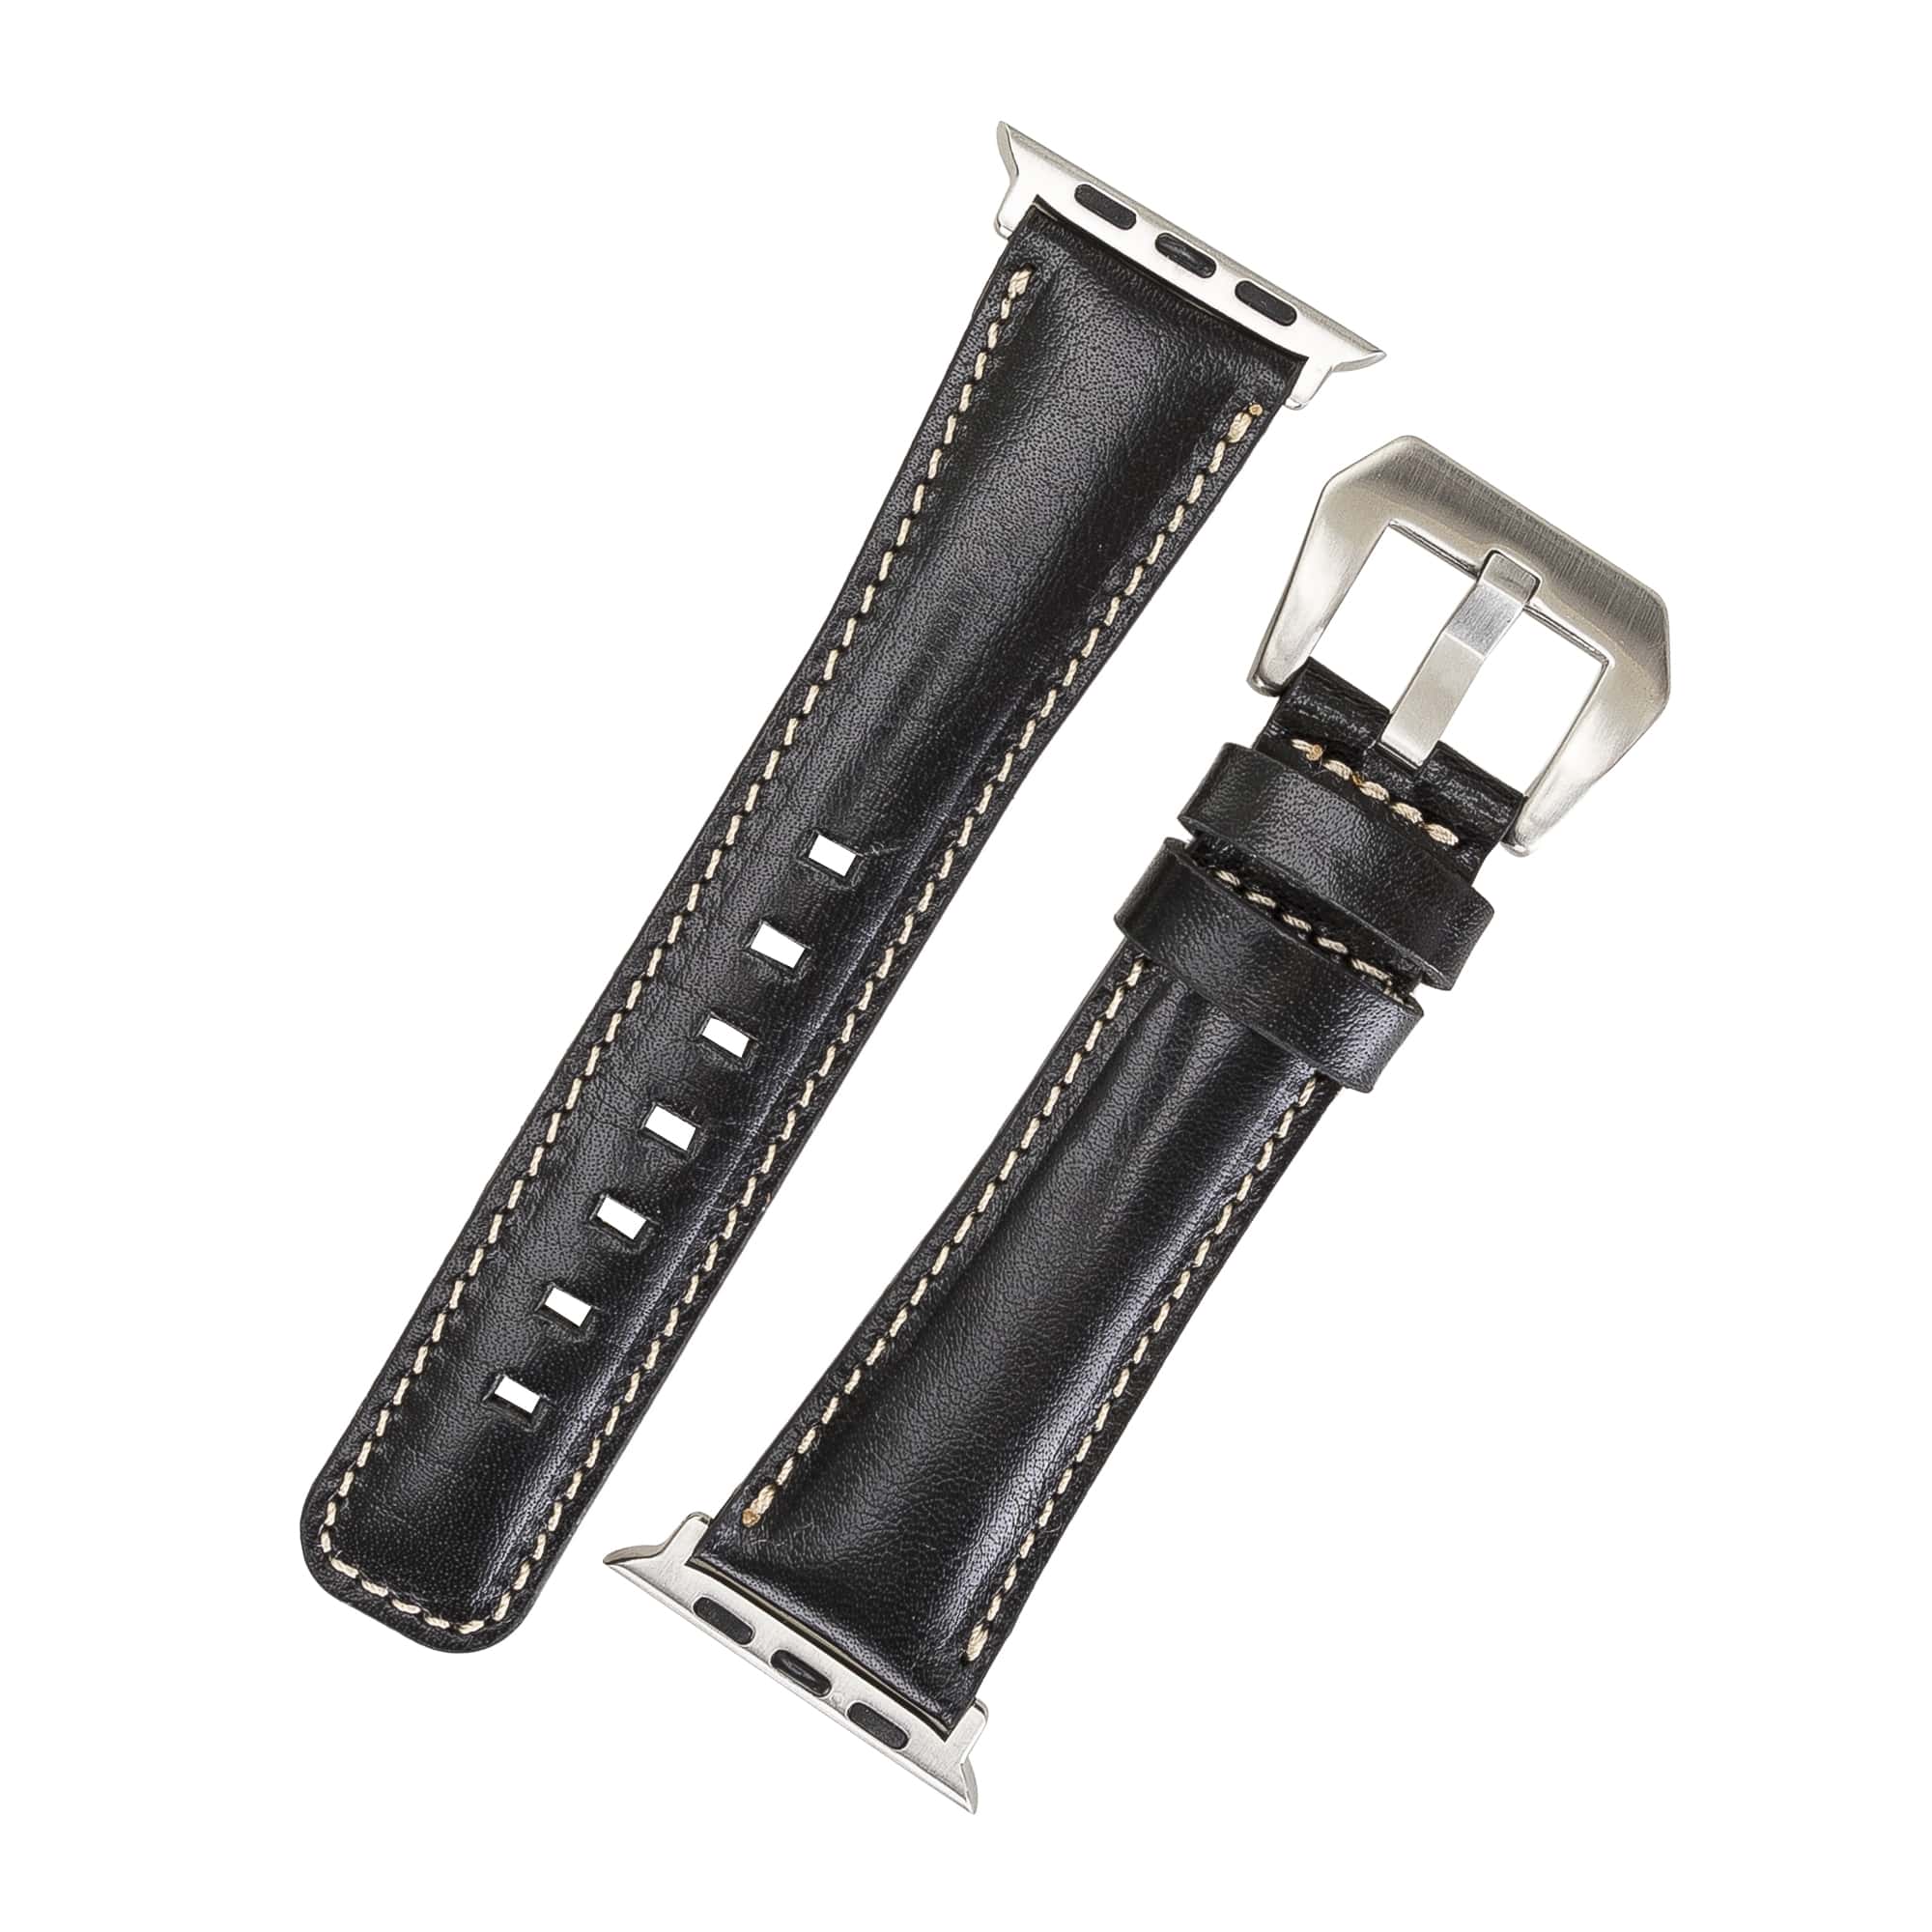 Harrow Black Genuine Leather Apple Watch Band Strap 38mm 40mm 42mm 44mm 45mm for All Series - Bomonti - 4